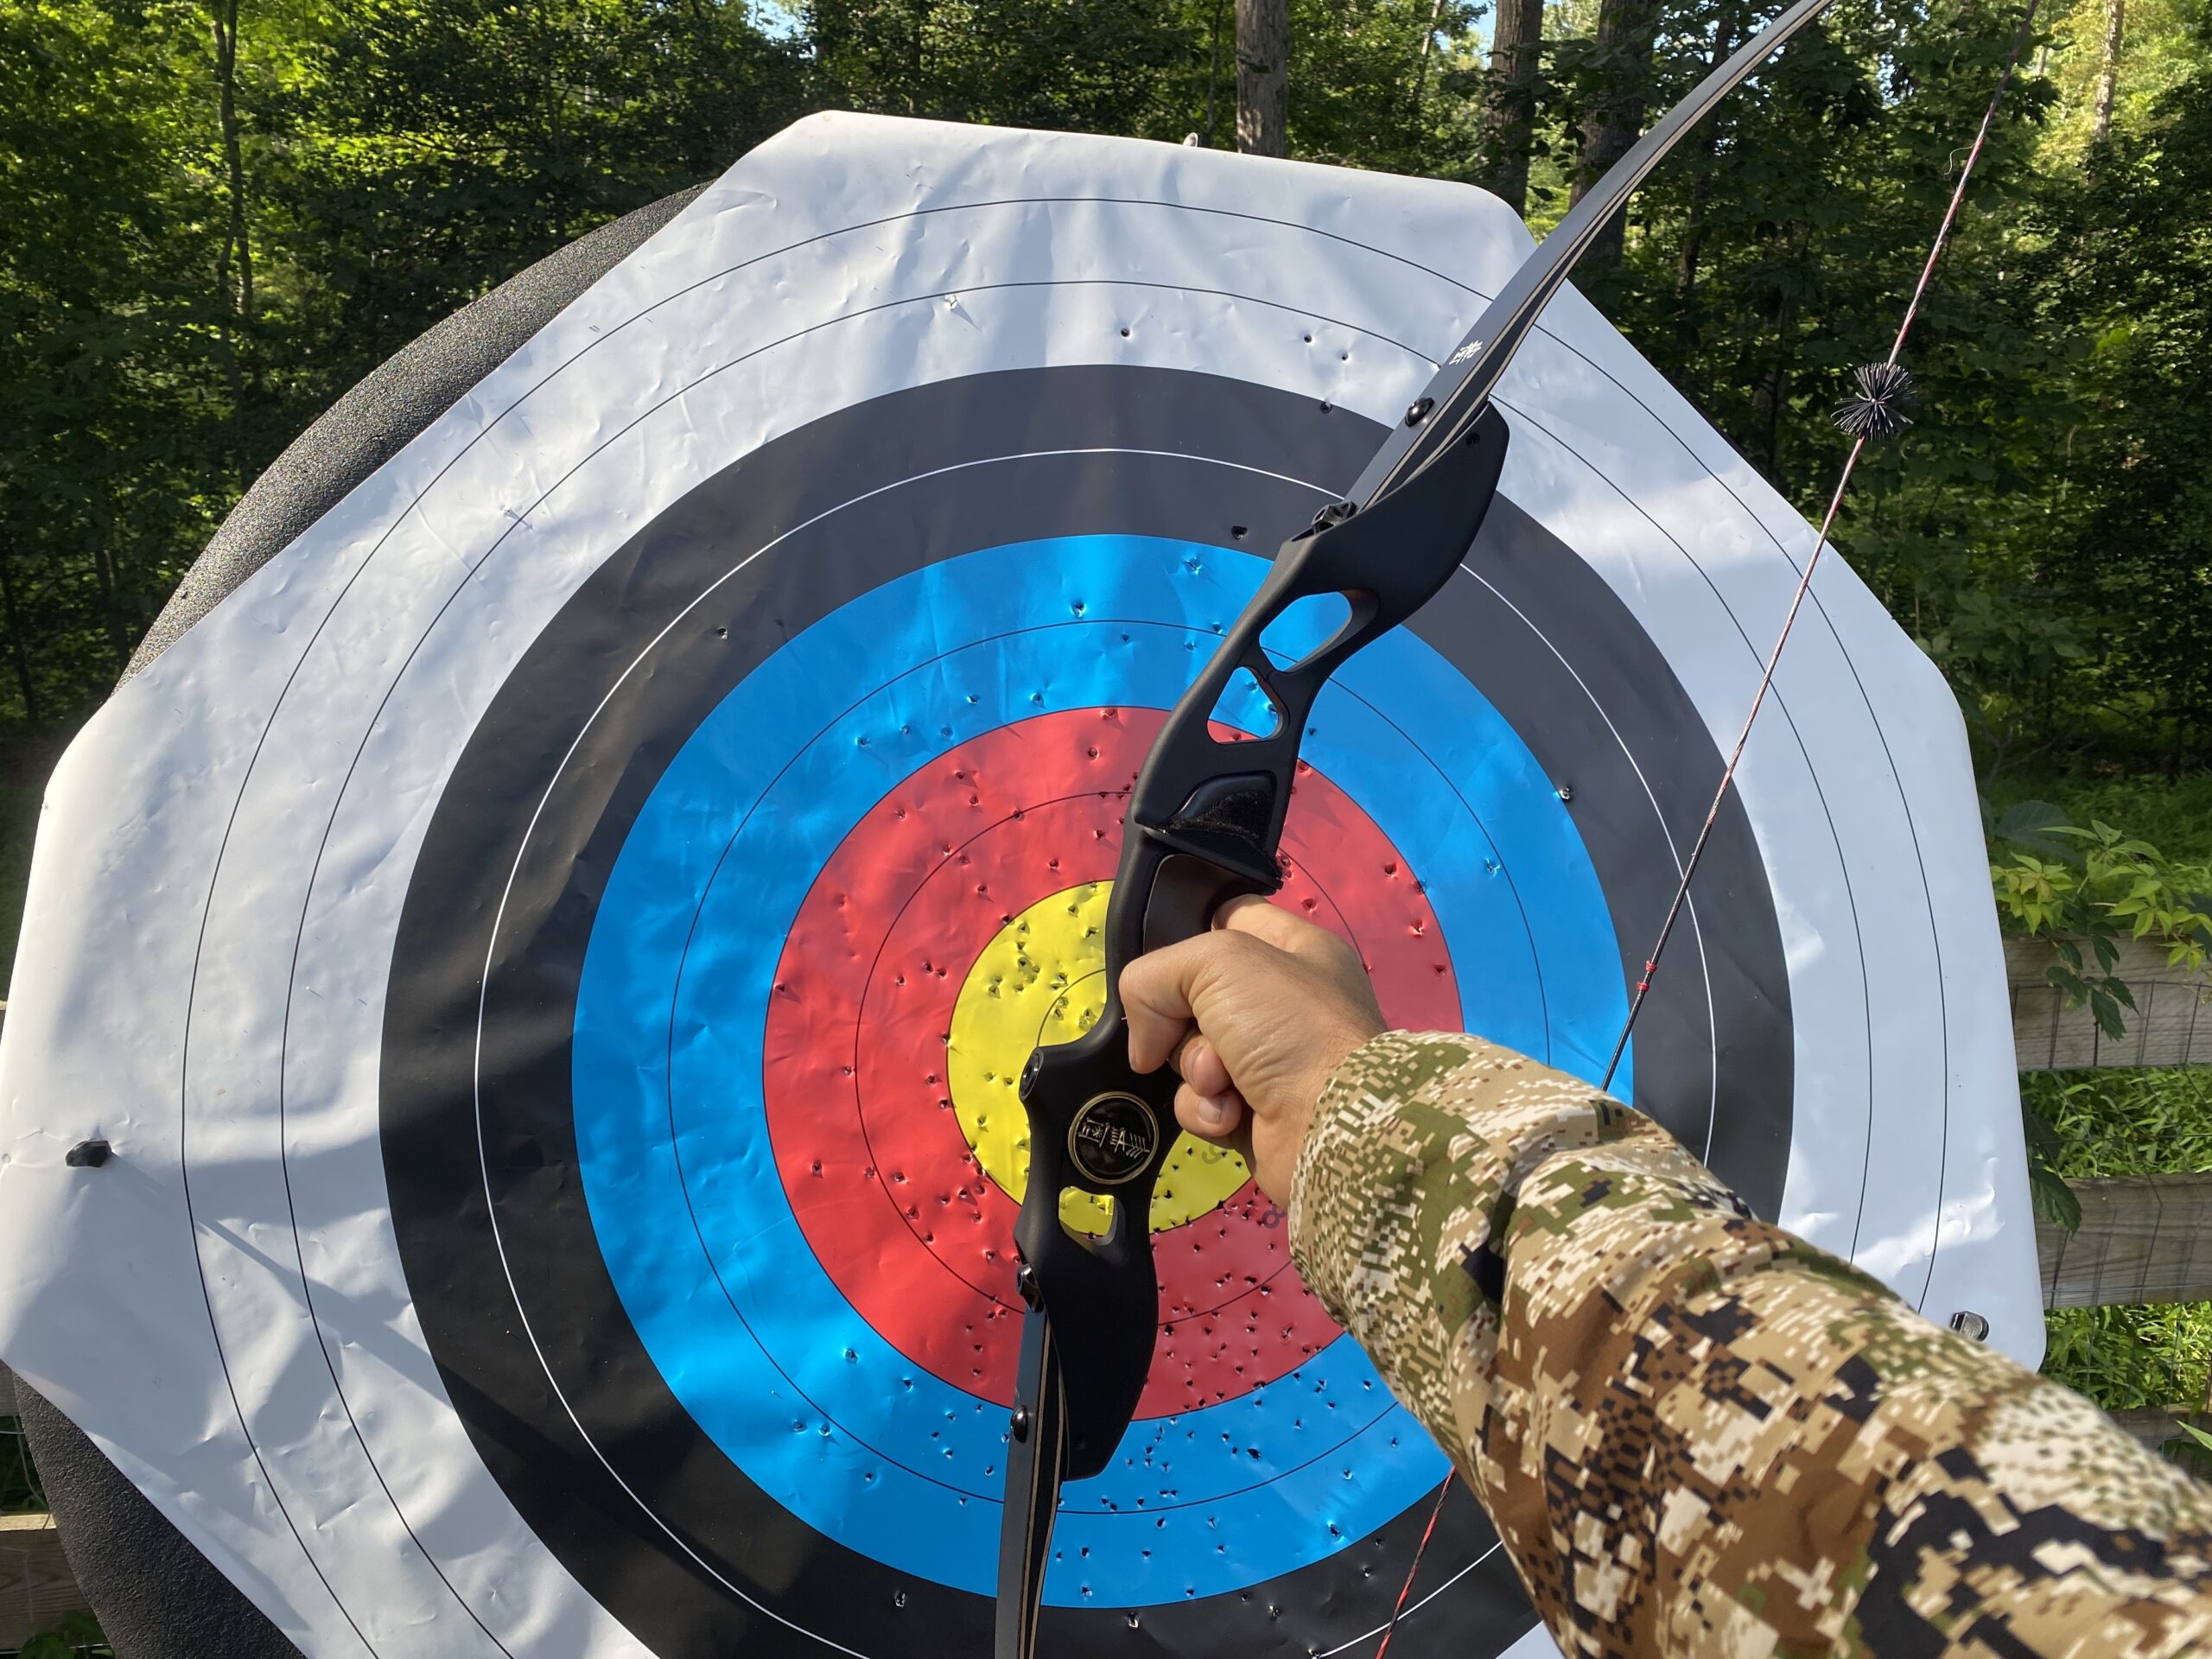 The Best Recurve Bows of 2022